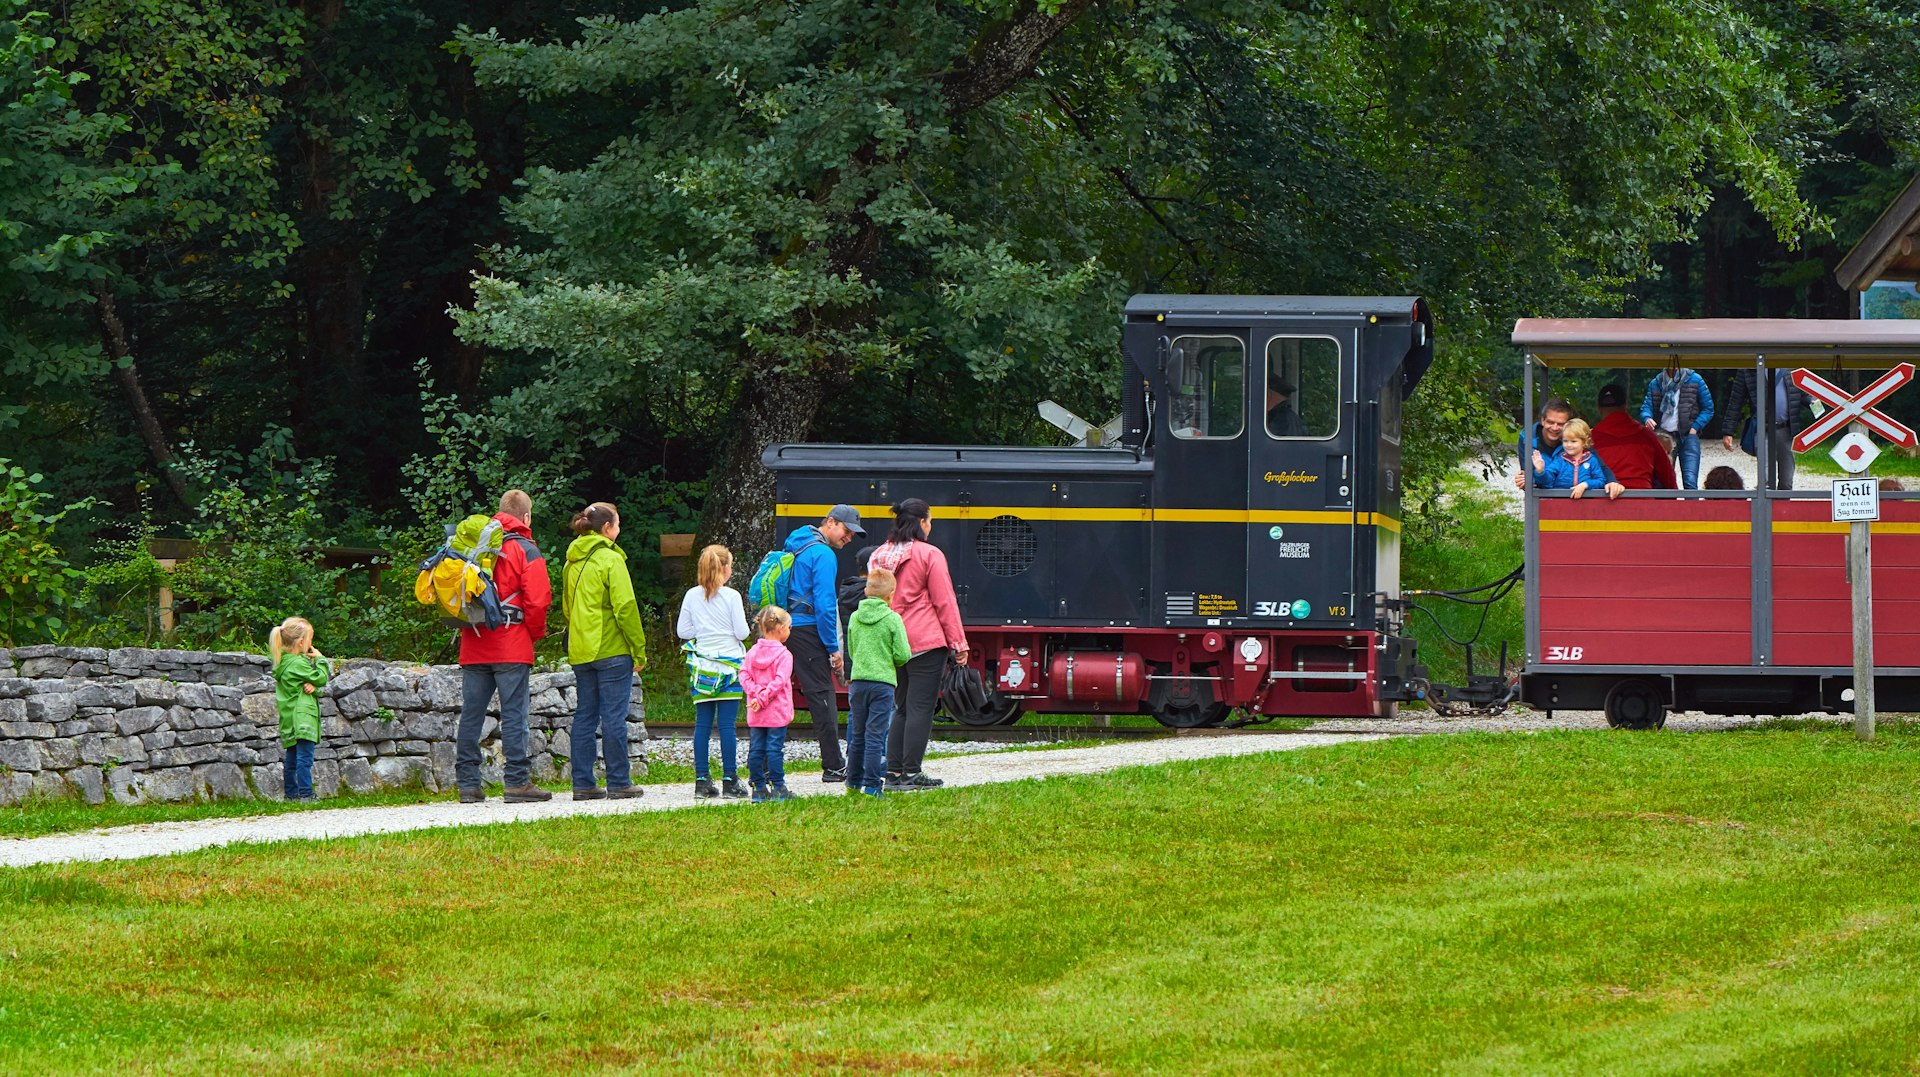 A line of young children waiting with adults to go on a small steam train